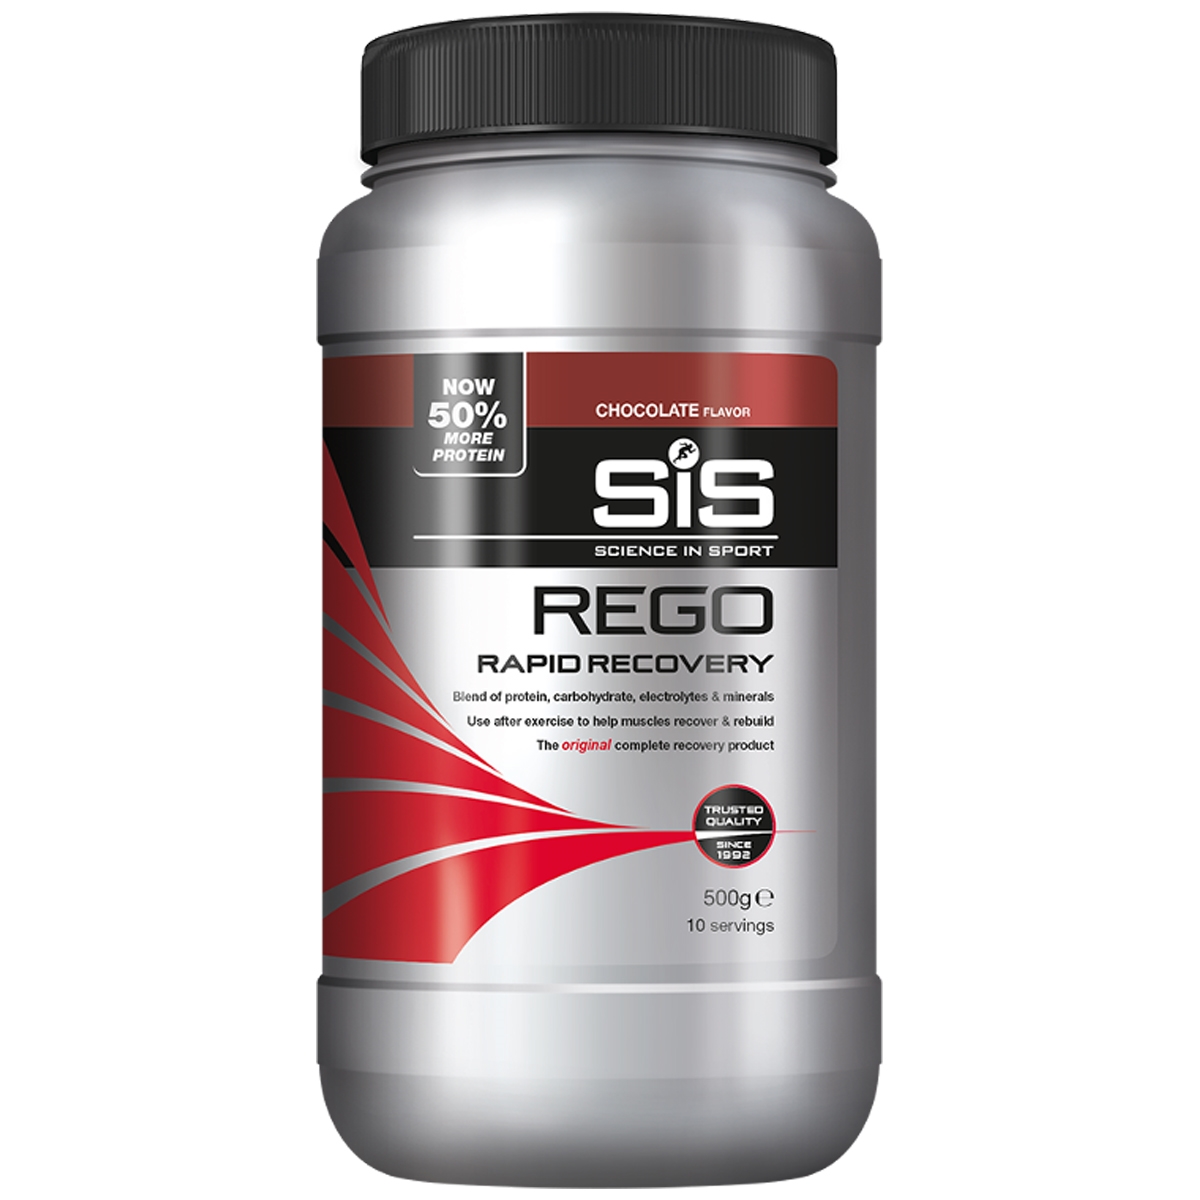 Rego Rapid Recovery Drink Sabor Chocolate 500g